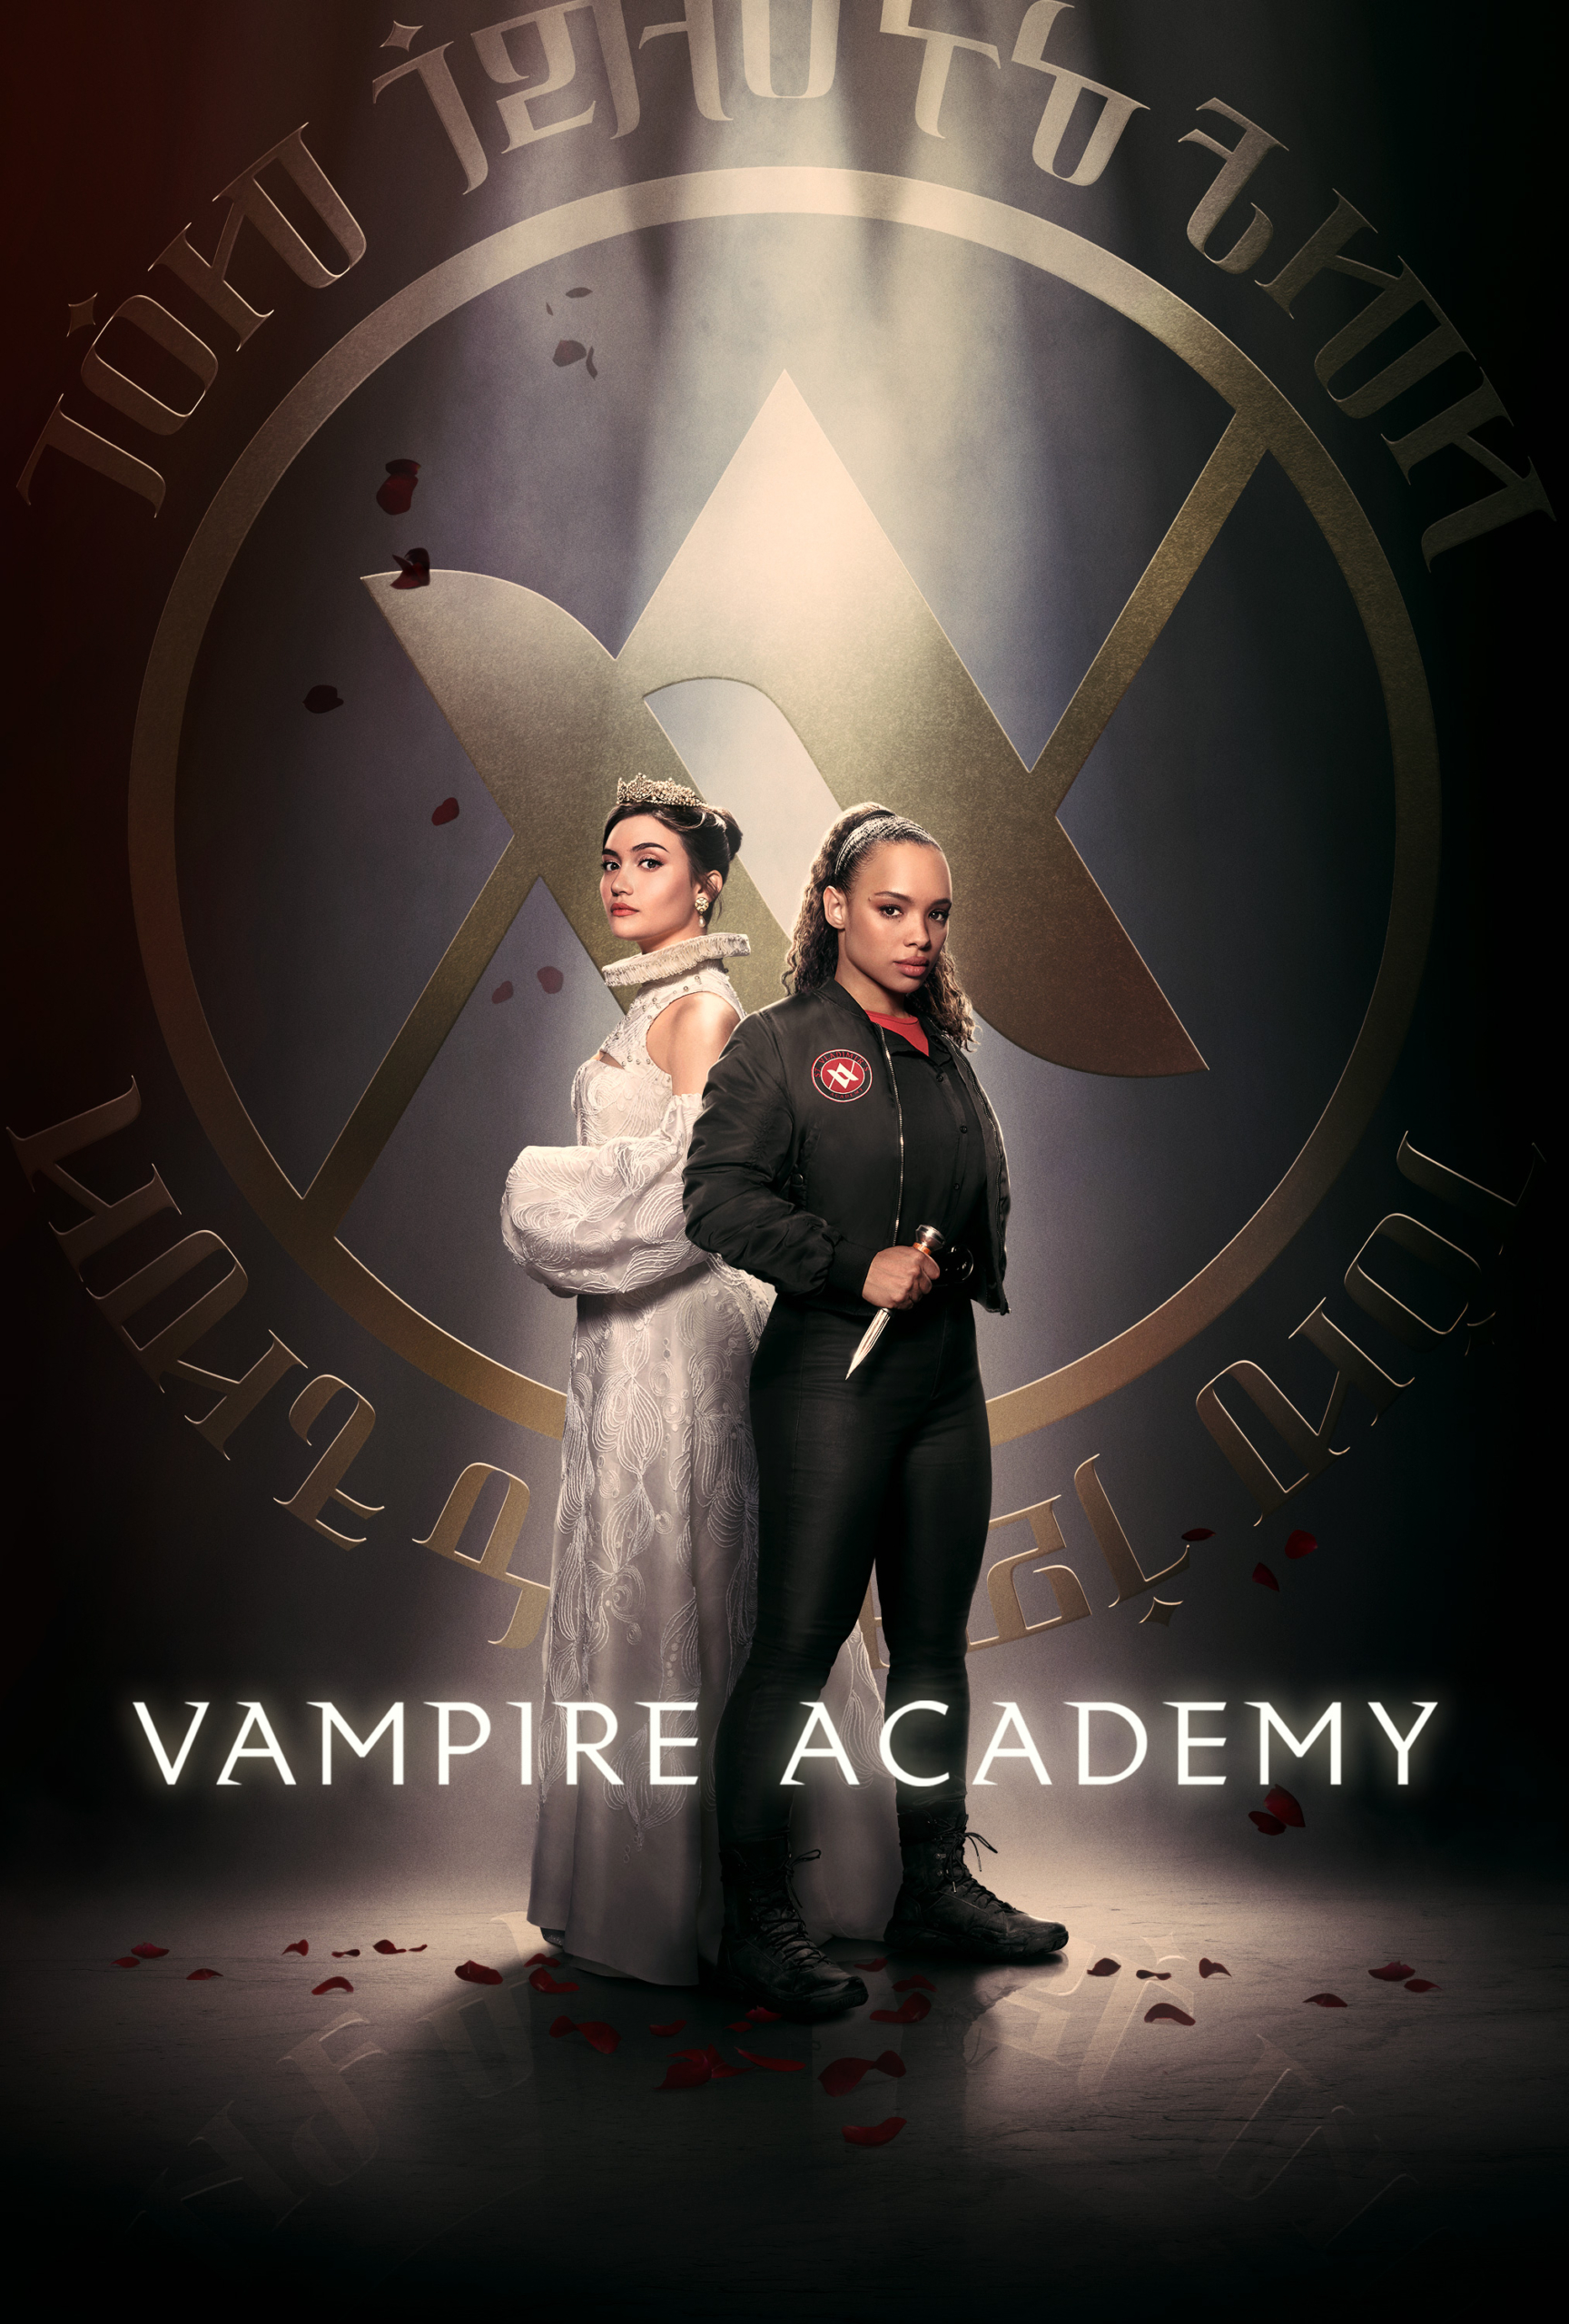 Vampire Academy Review: The Vampire Diaries meets Game of Thrones